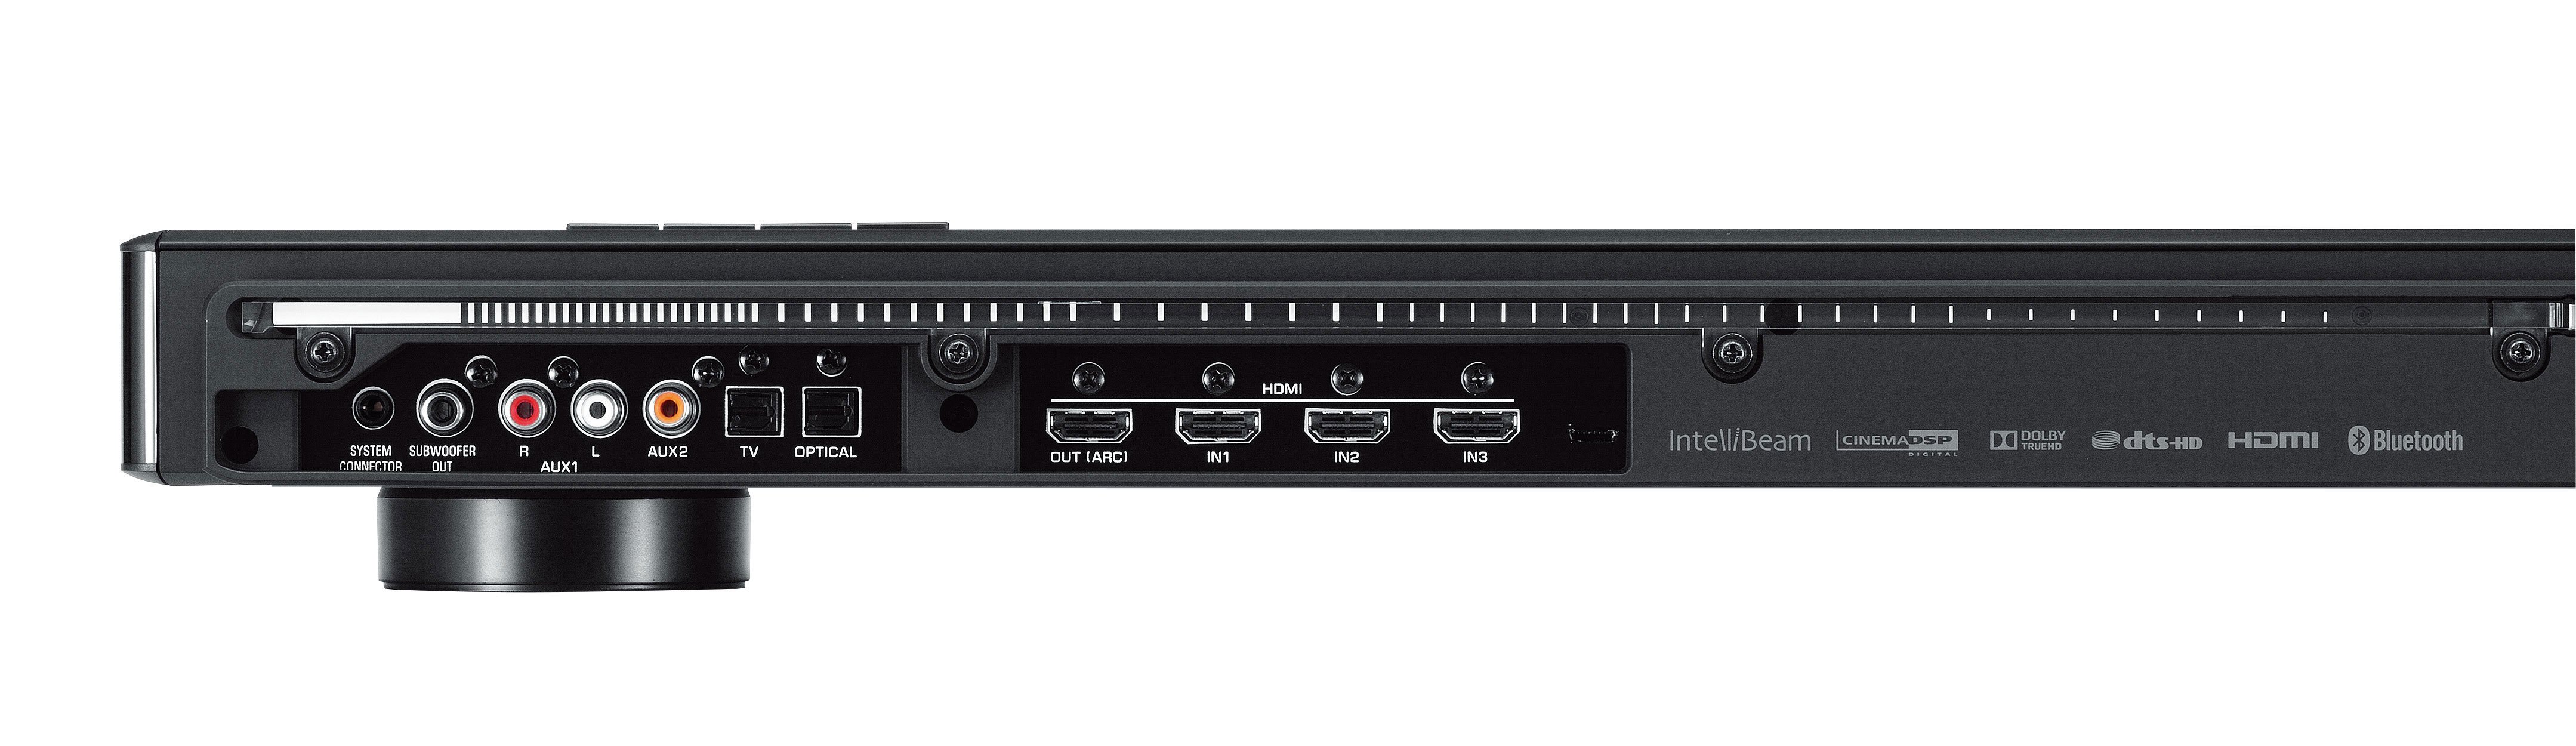 YSP-2500 - Overview - Sound Bars - Audio & Visual - Products ...